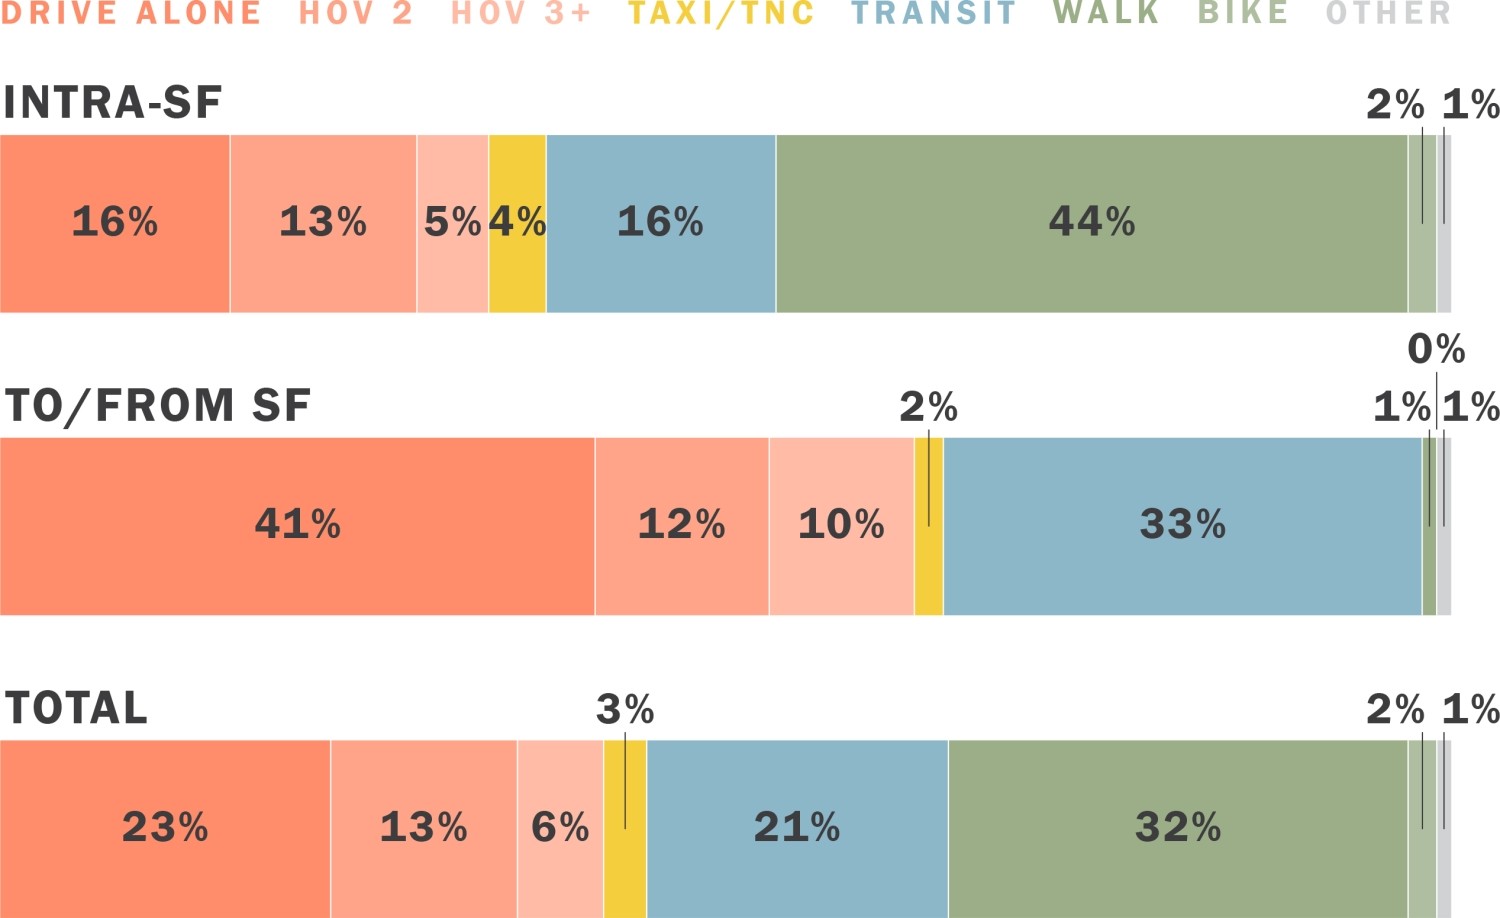 A horizontal stacked bar chart showing mode share by travel market. Intra SF trips are: 16% drive alone, 13% HOV 2, 5% HOV 3, 4% taxi/TNC; 15% transit; 44% walk, 2% bike, 1% other. Trips to/ from SF are: 41% drive alone, 12% HOV 2, 10% HOV 3, 2% taxi/TNC; 33% transit; 1% walk, 0% bike, 1% other. The total mode share is: 23% drive alone, 13% HOV 2, 6% HOV 3, 3% taxi/TNC; 21% transit; 32% walk, 2% bike, 1% other.